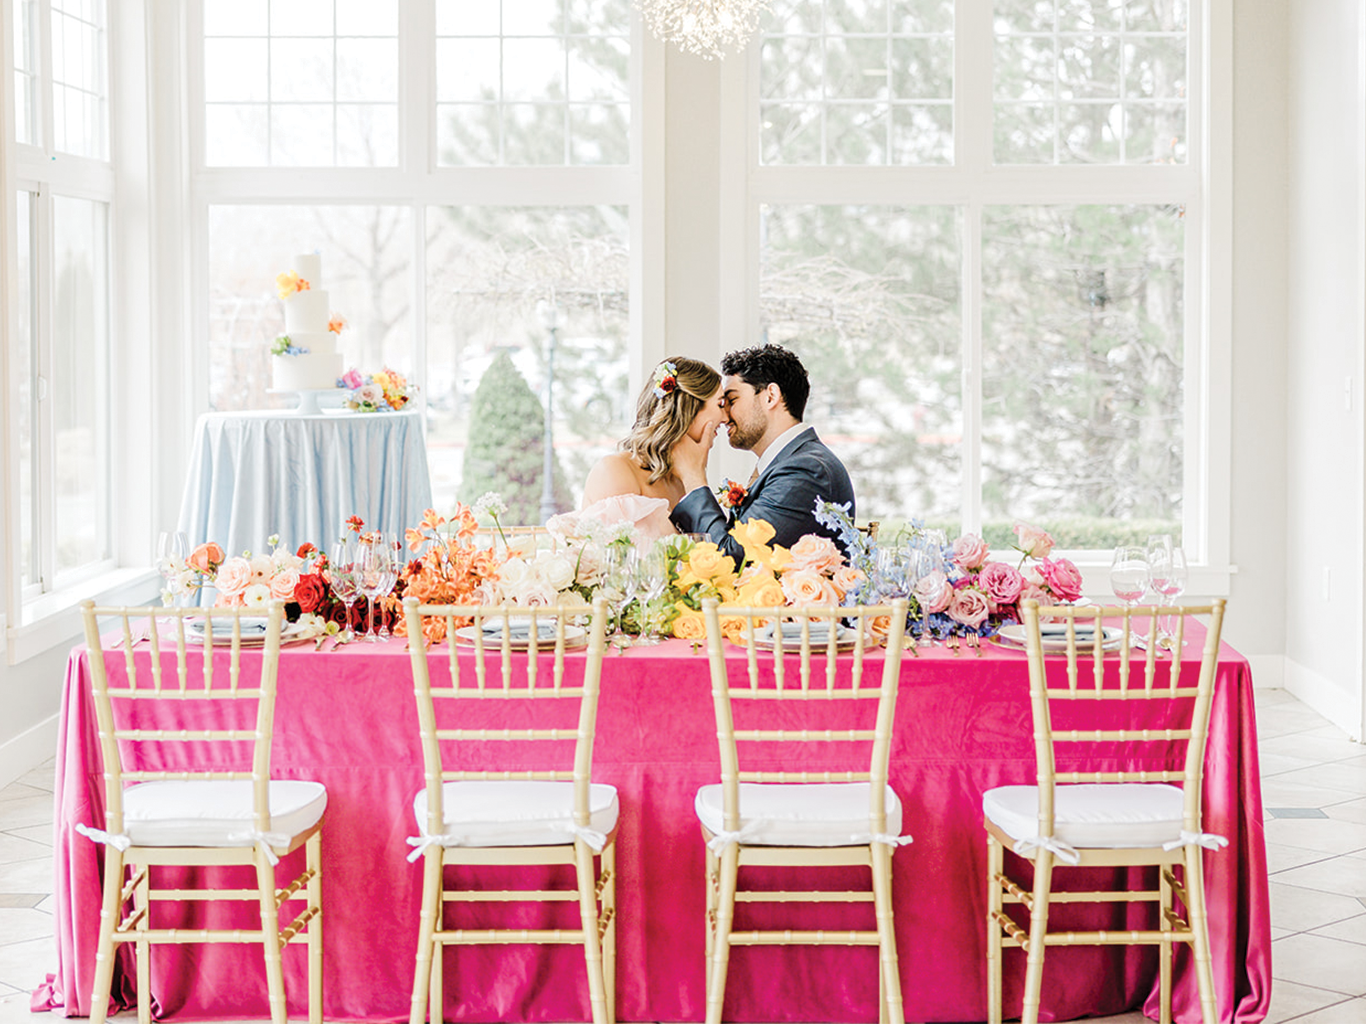 The bride and groom lean in for a kiss at a magenta wedding banquet table filled to the brim with colorful florals in the most vividly colorful wedding design we've ever curated. Custom color wedding florals professional wedding design unique wedding ideas and wedding inspo #luxurywedding #luxuryslcwedding #weddingplanner #boldwedding #colorfulwedding #pinkweddinginspo